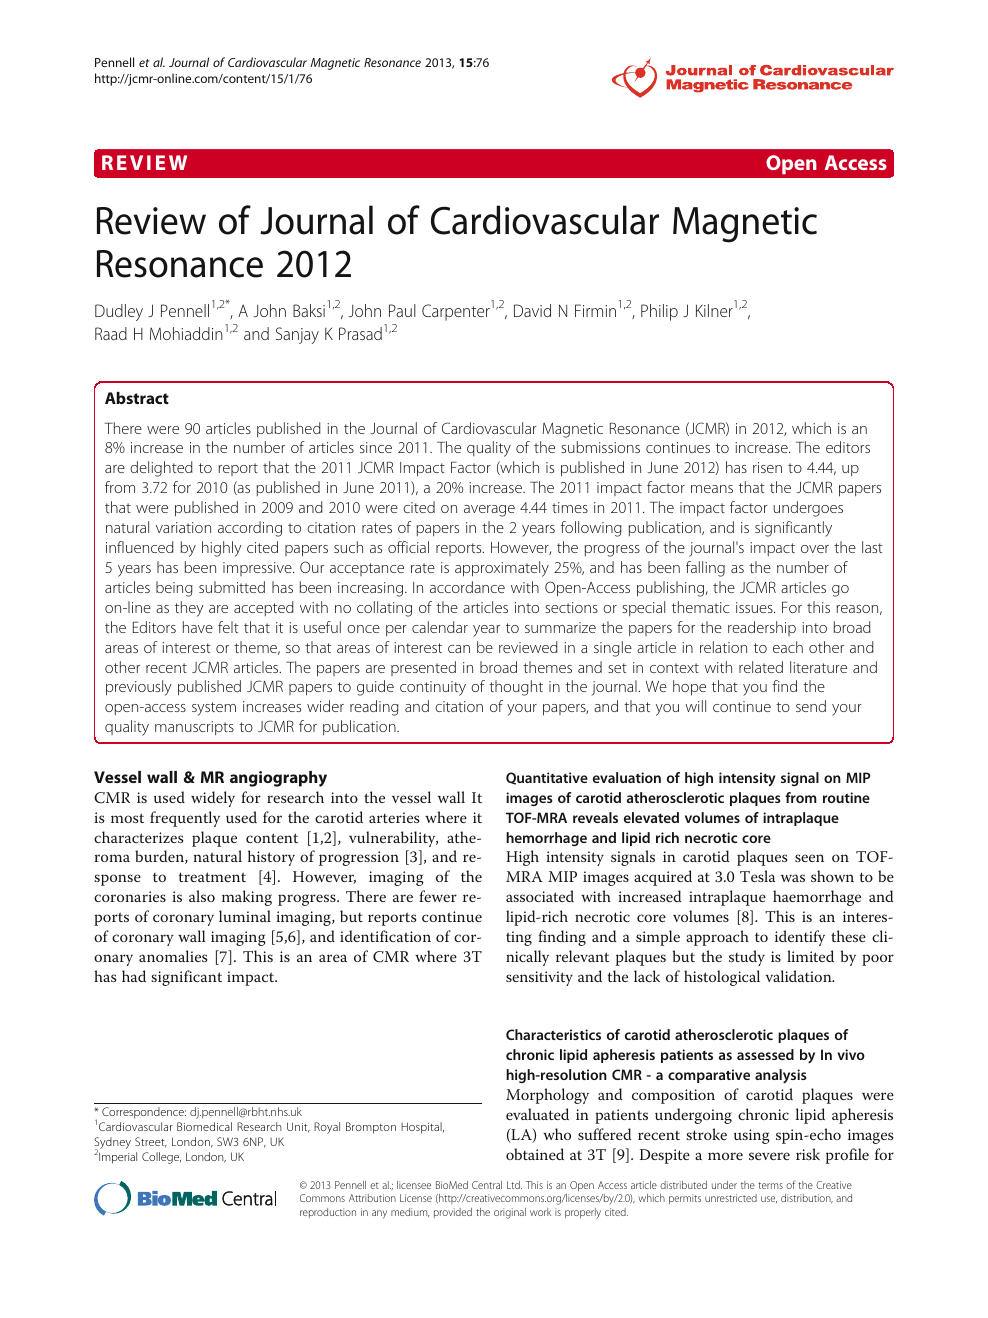 Myocardial Strain Evaluation with Cardiovascular MRI: Physics, Principles,  and Clinical Applications